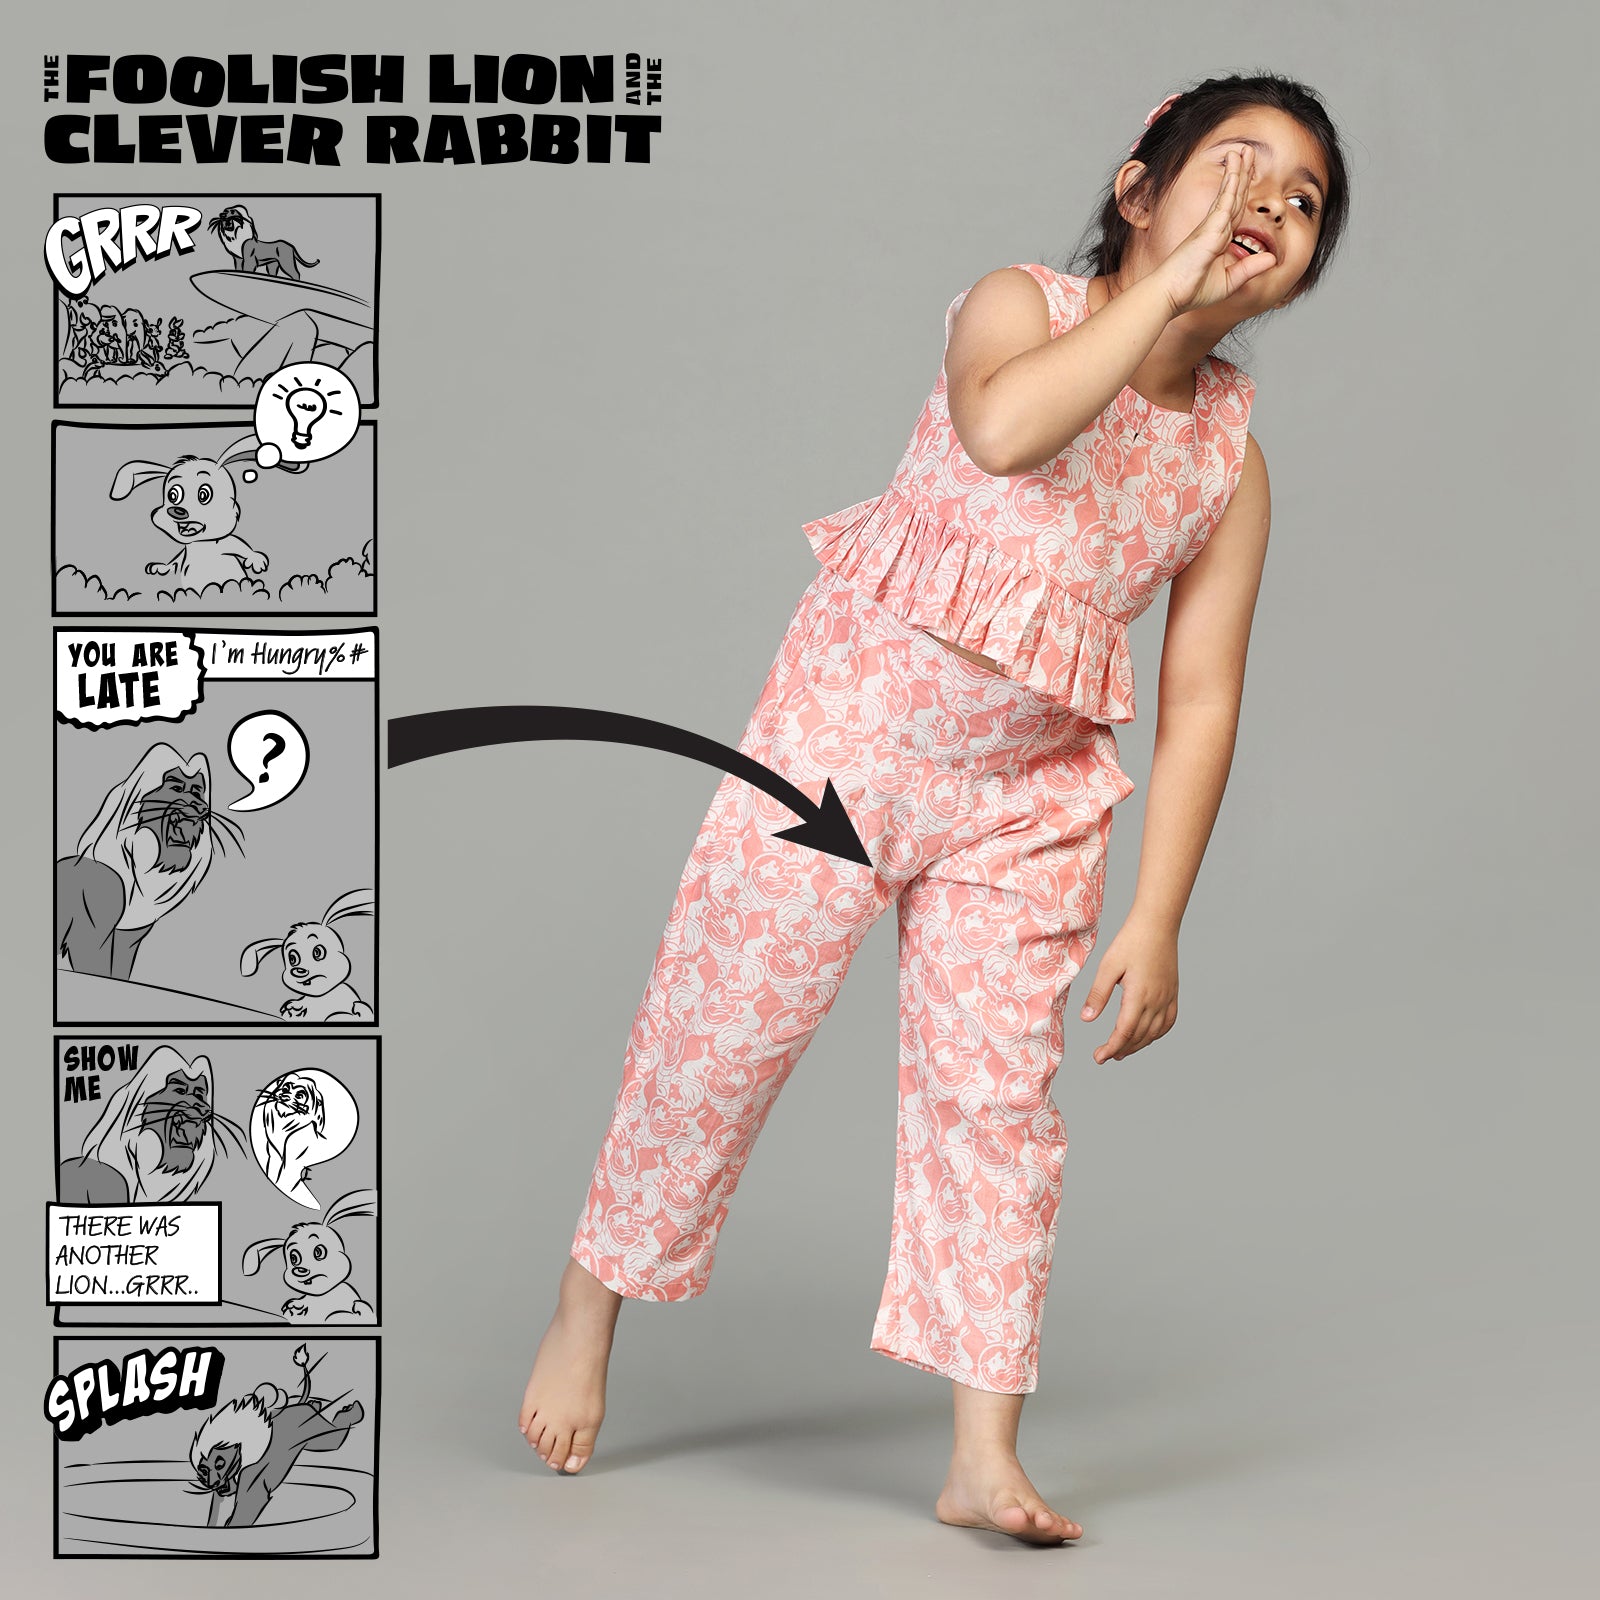 Cotton Crop Top & Pants For Girls with The Foolish Lion & The Clever Rabbit Print